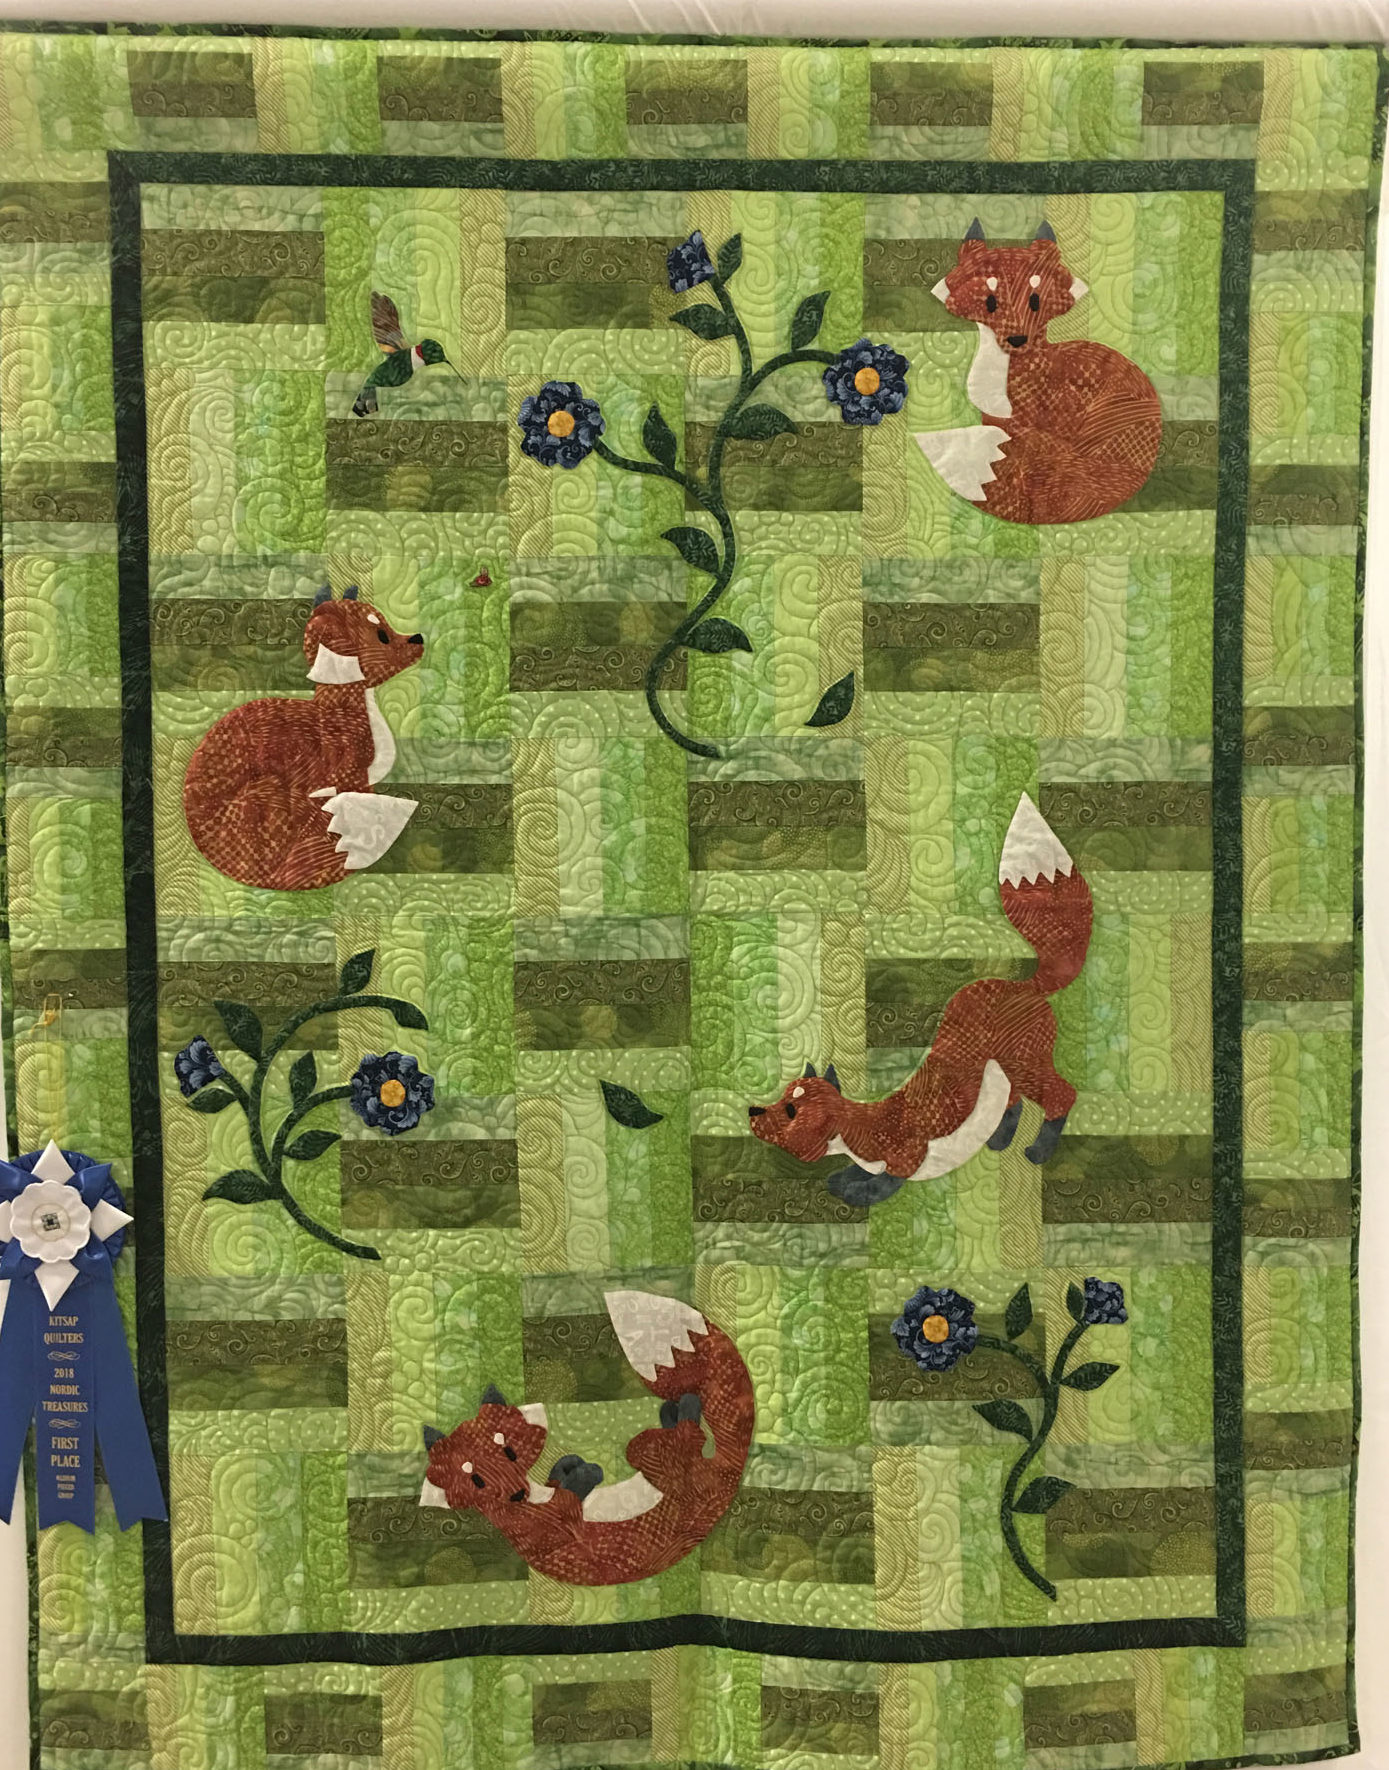 614 “Quilt for Kaci” made by Sharon Broom, quilted by Rainy Day Quilts, 1st place Medium Group Quilt, 2018 Kitsap Quilt Show